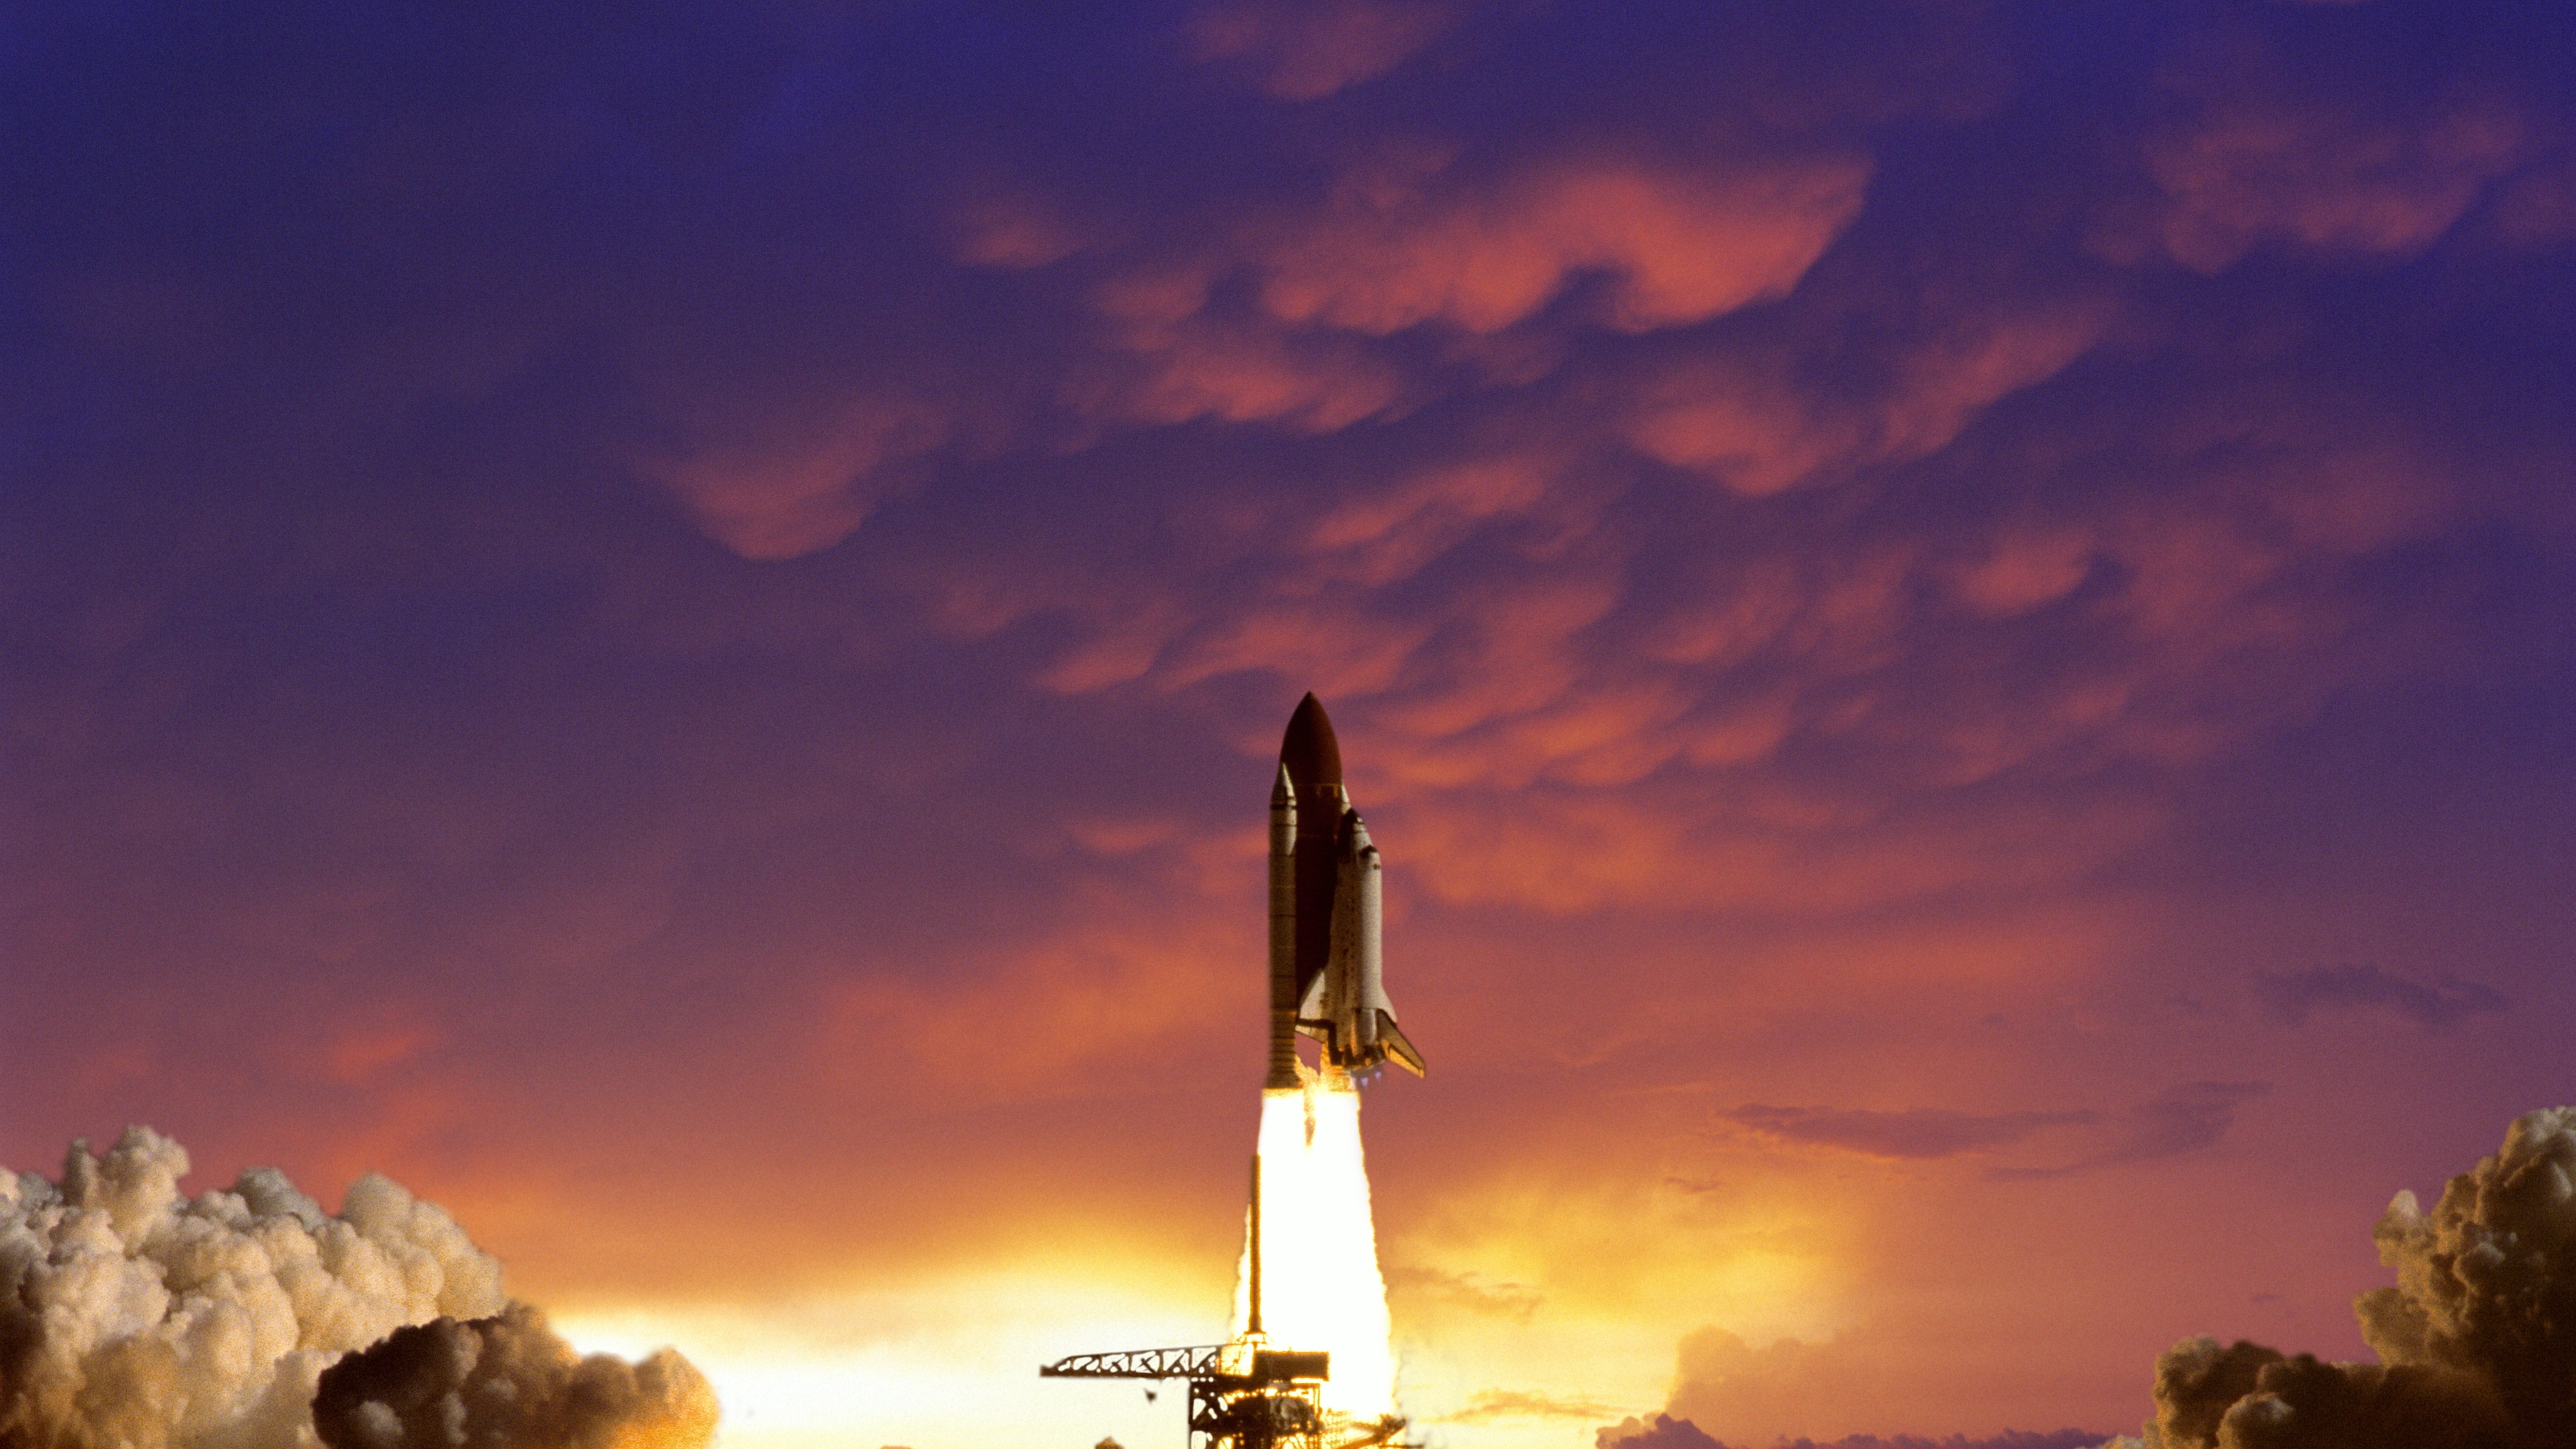 SPACE SHUTTLE LAUNCH AT SUNSET